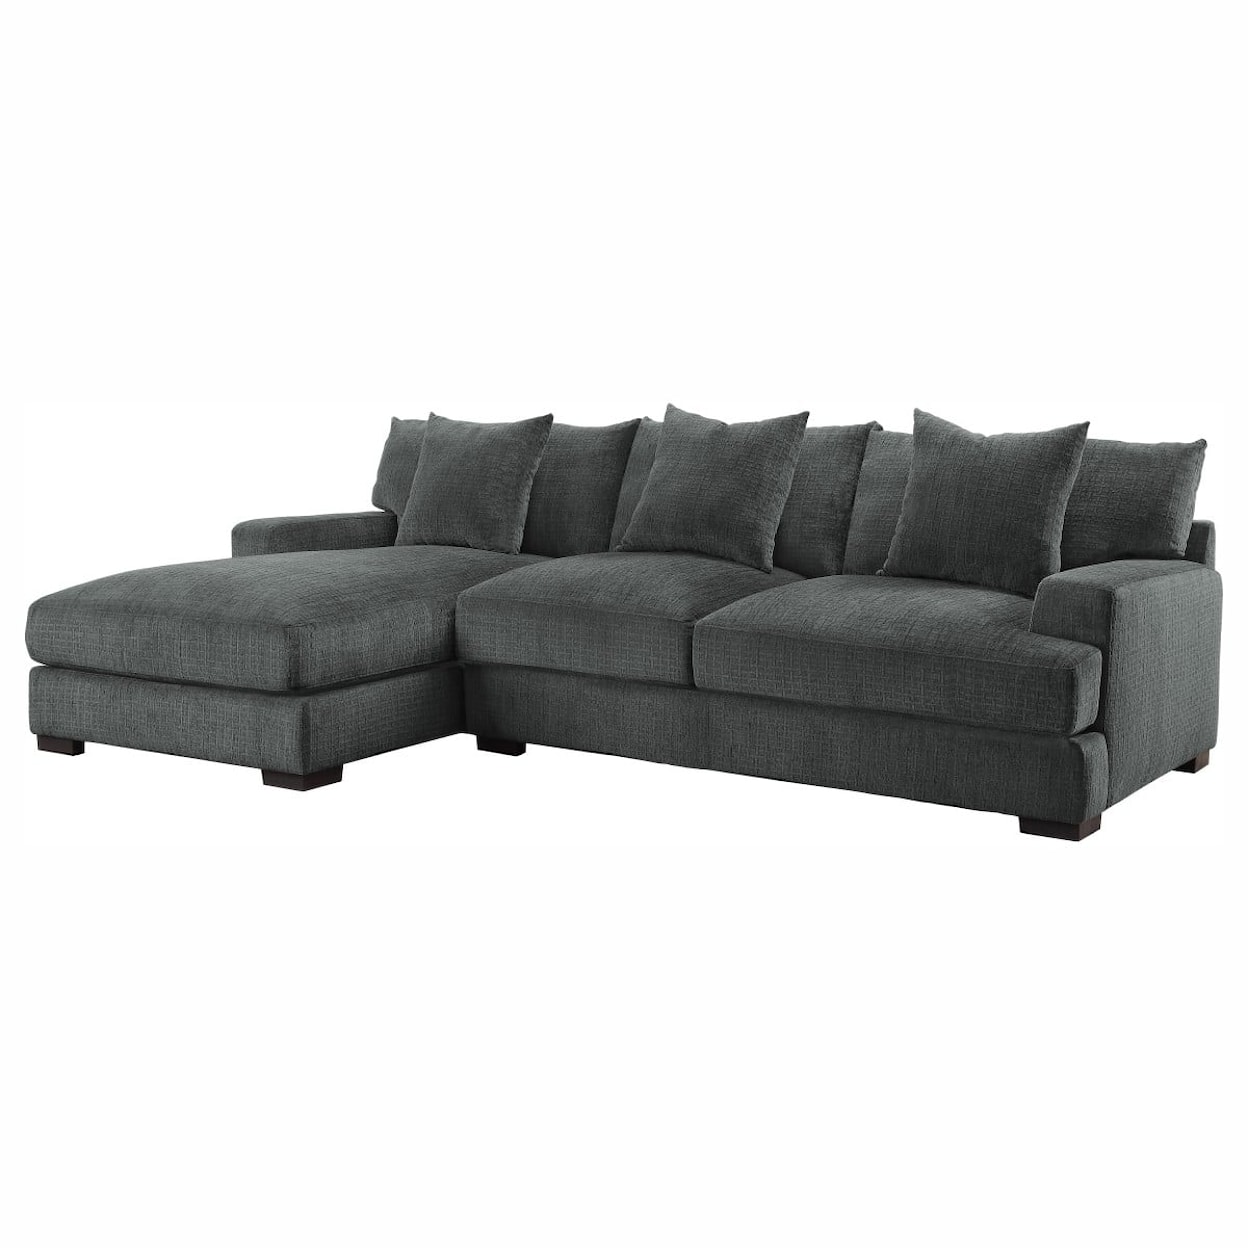 Homelegance Furniture Worchester 2-Piece Sectional Sofa